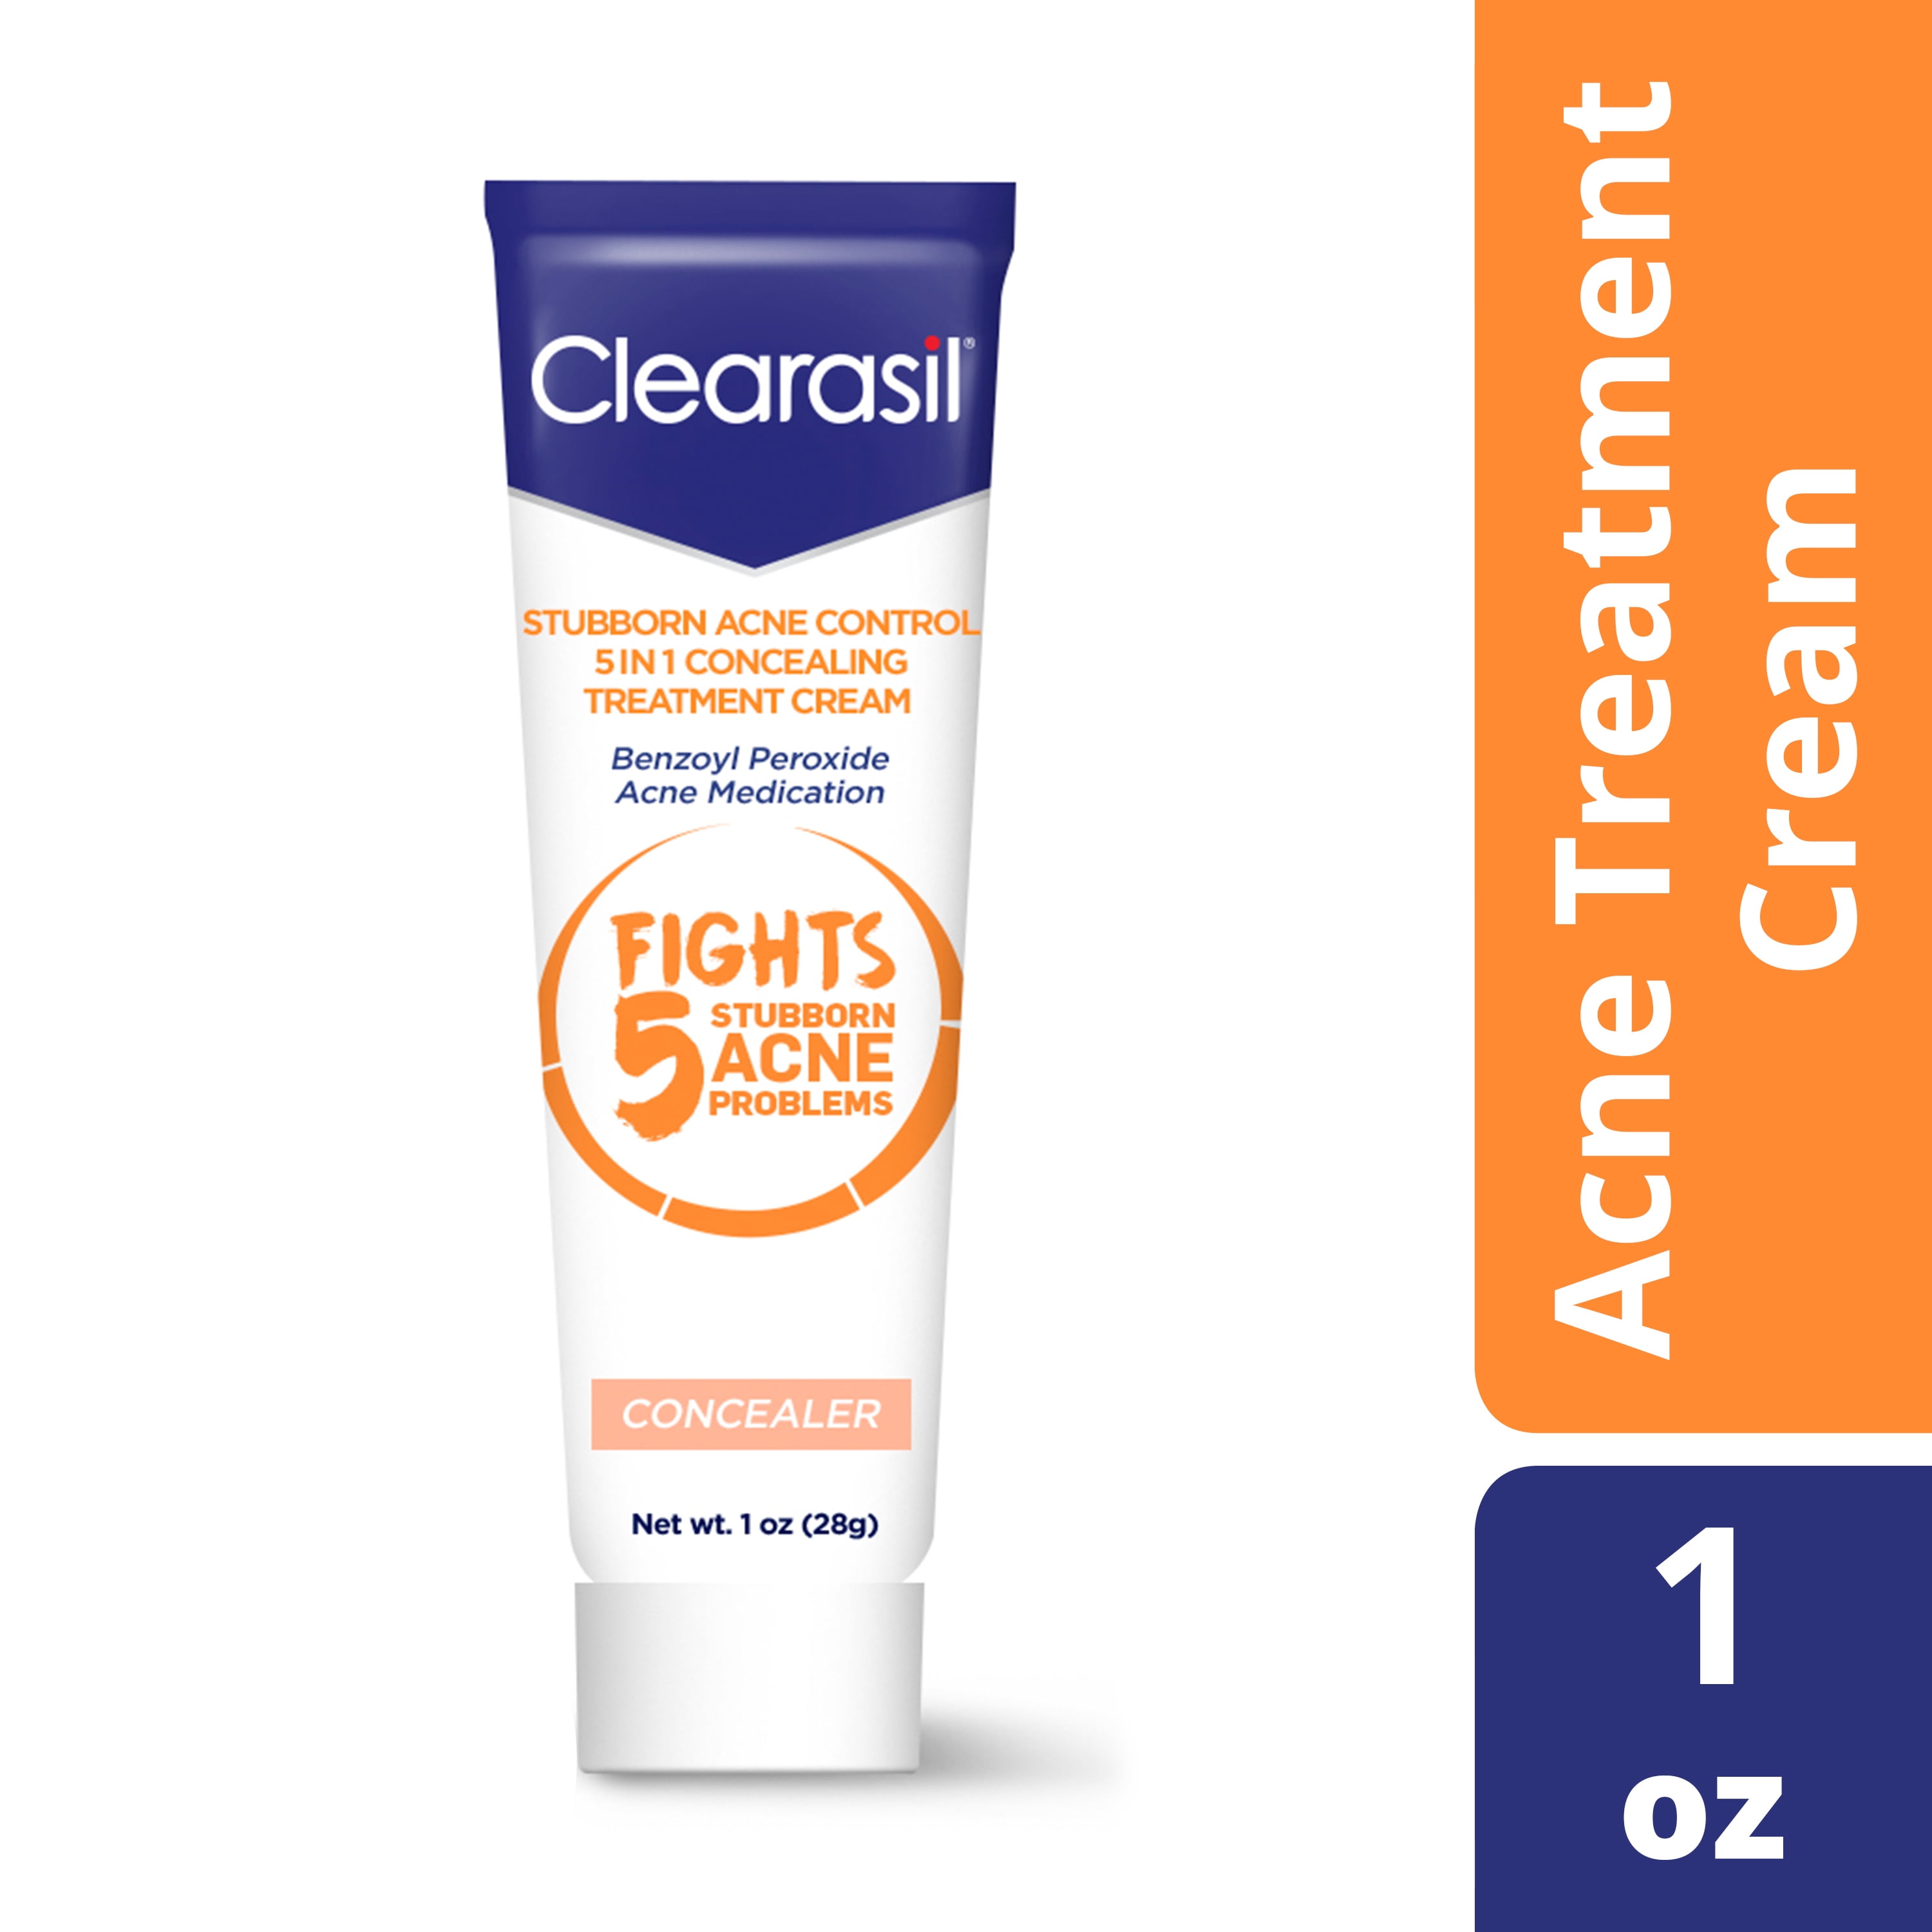 Acne - Clearasil Stubborn Acne Control 5-in-1 Concealing Treatment Cream with Benzoyl Peroxide Acne Medication to Clear Acne, 1 Ounce - Walmart.com